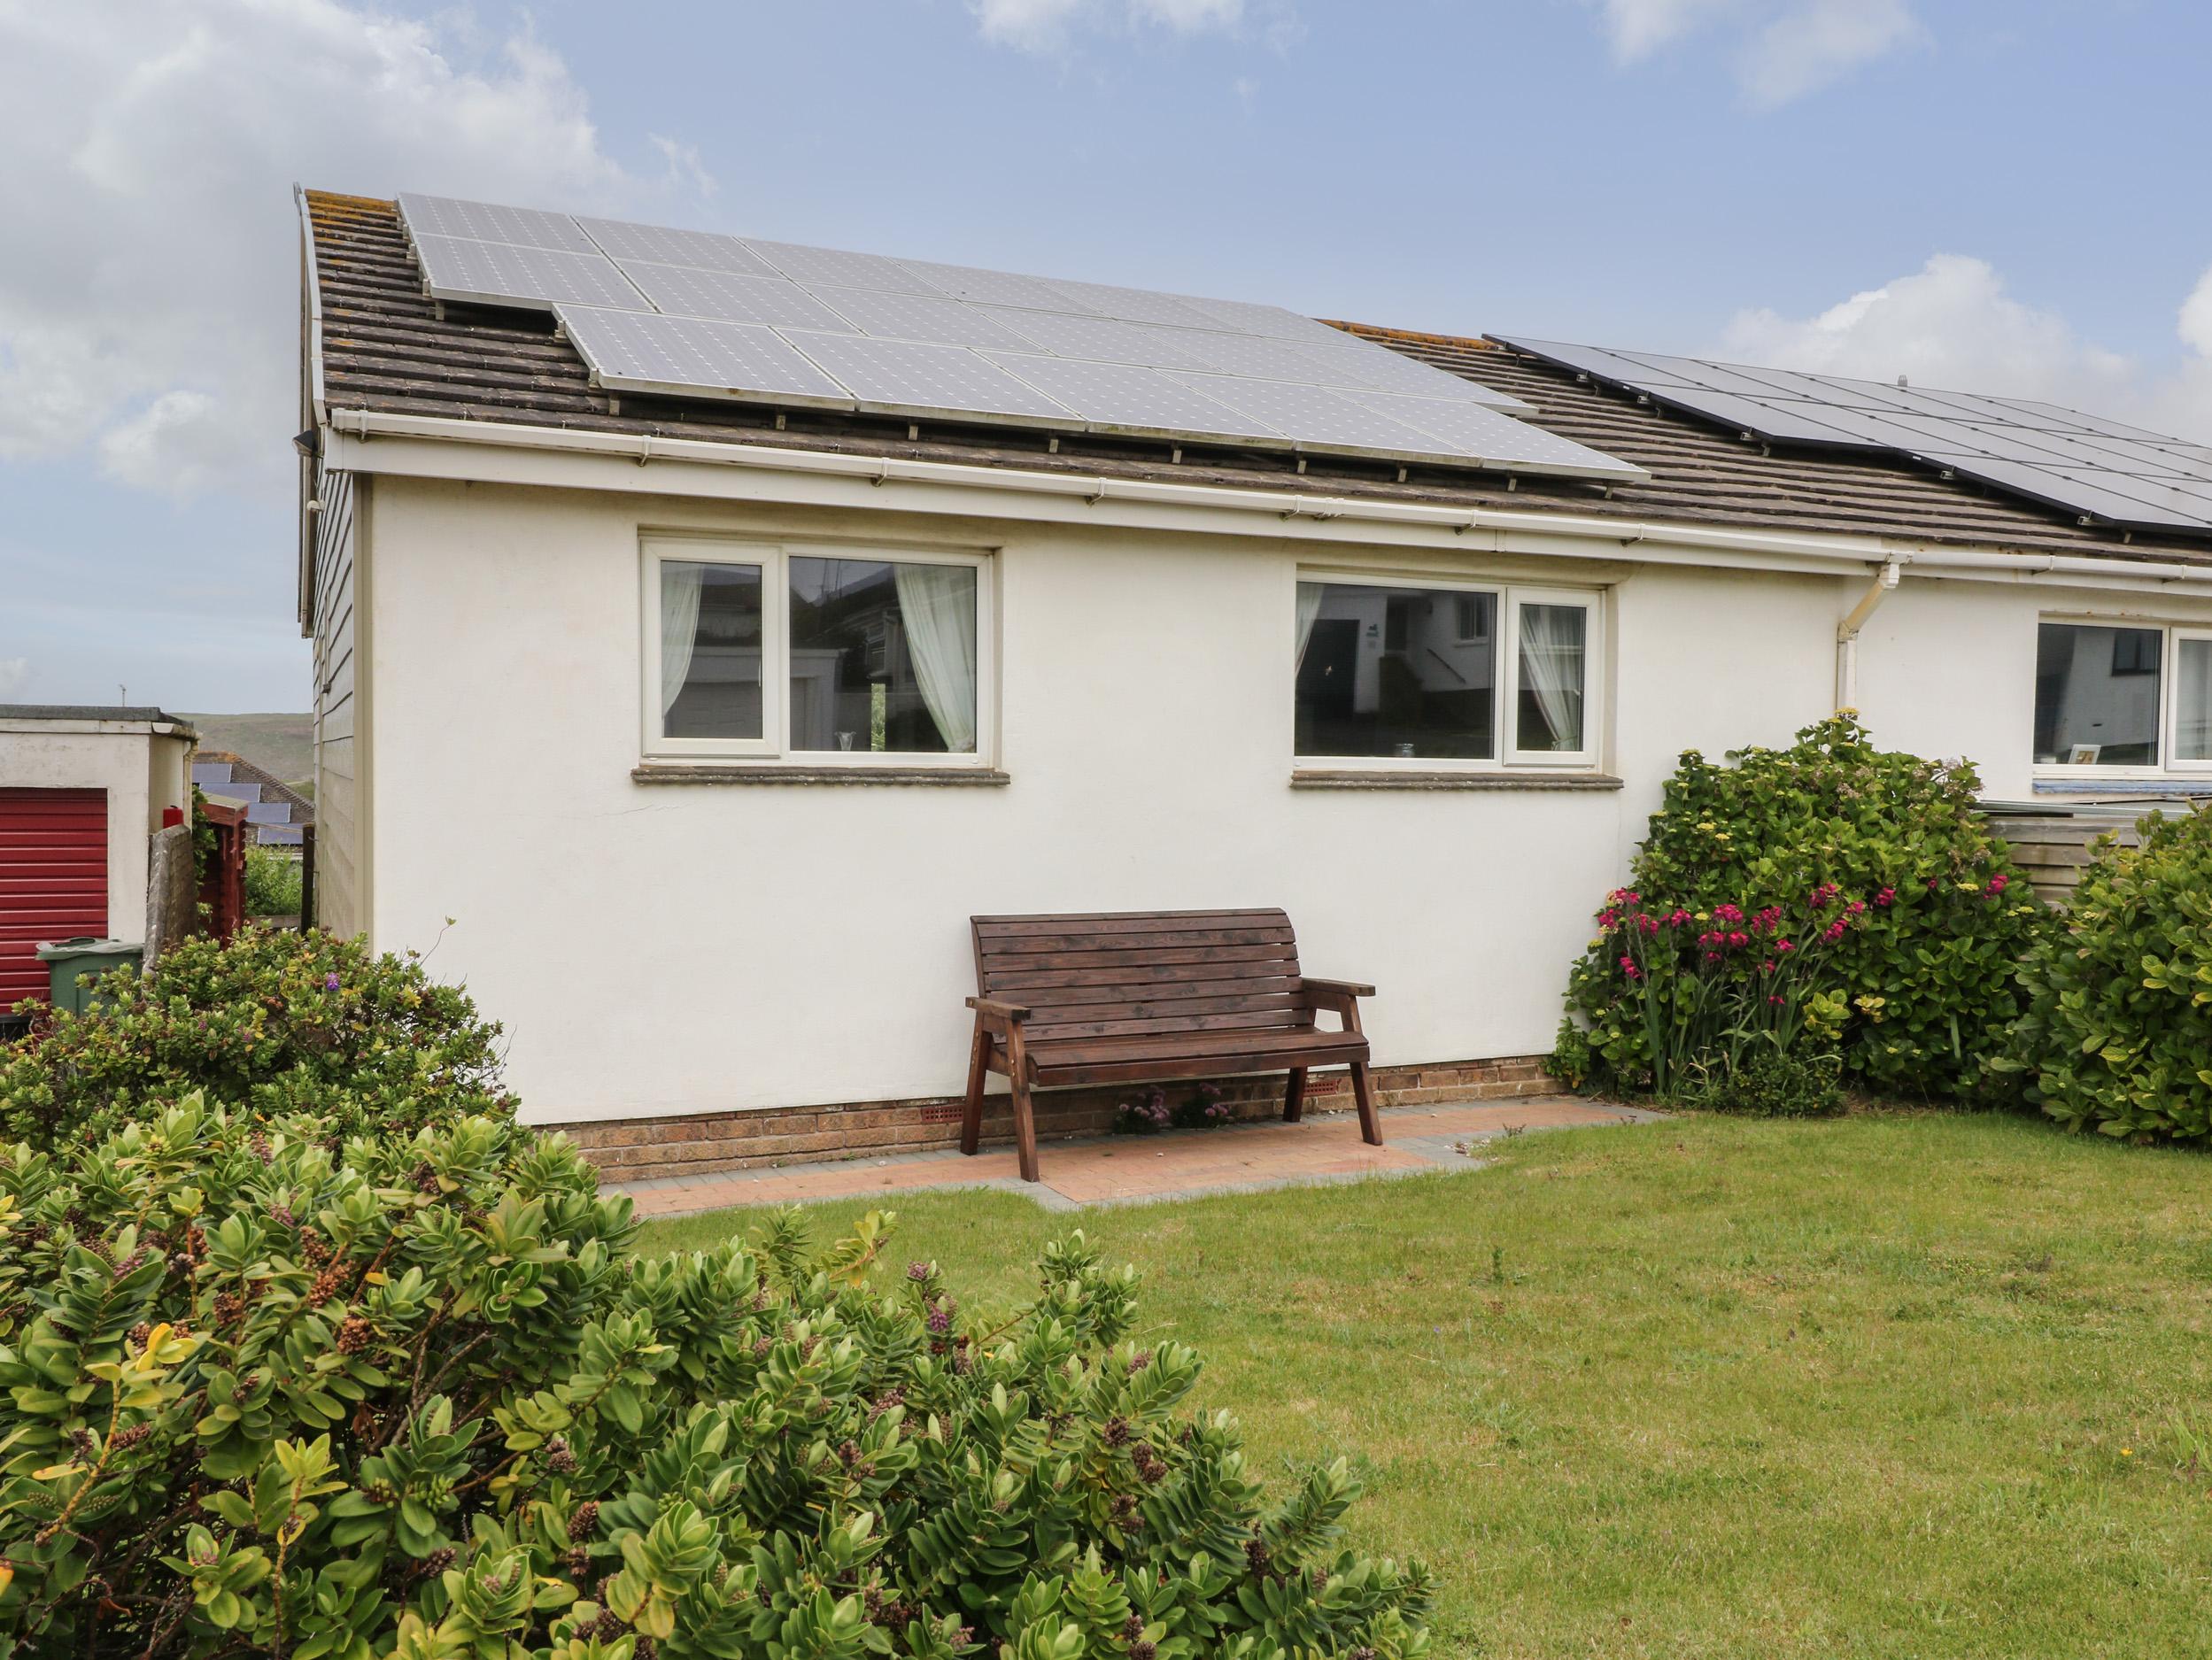 Holiday Cottage Reviews for 7 Atlantic Close - Cottage Holiday in Bude, Cornwall Inc Scilly